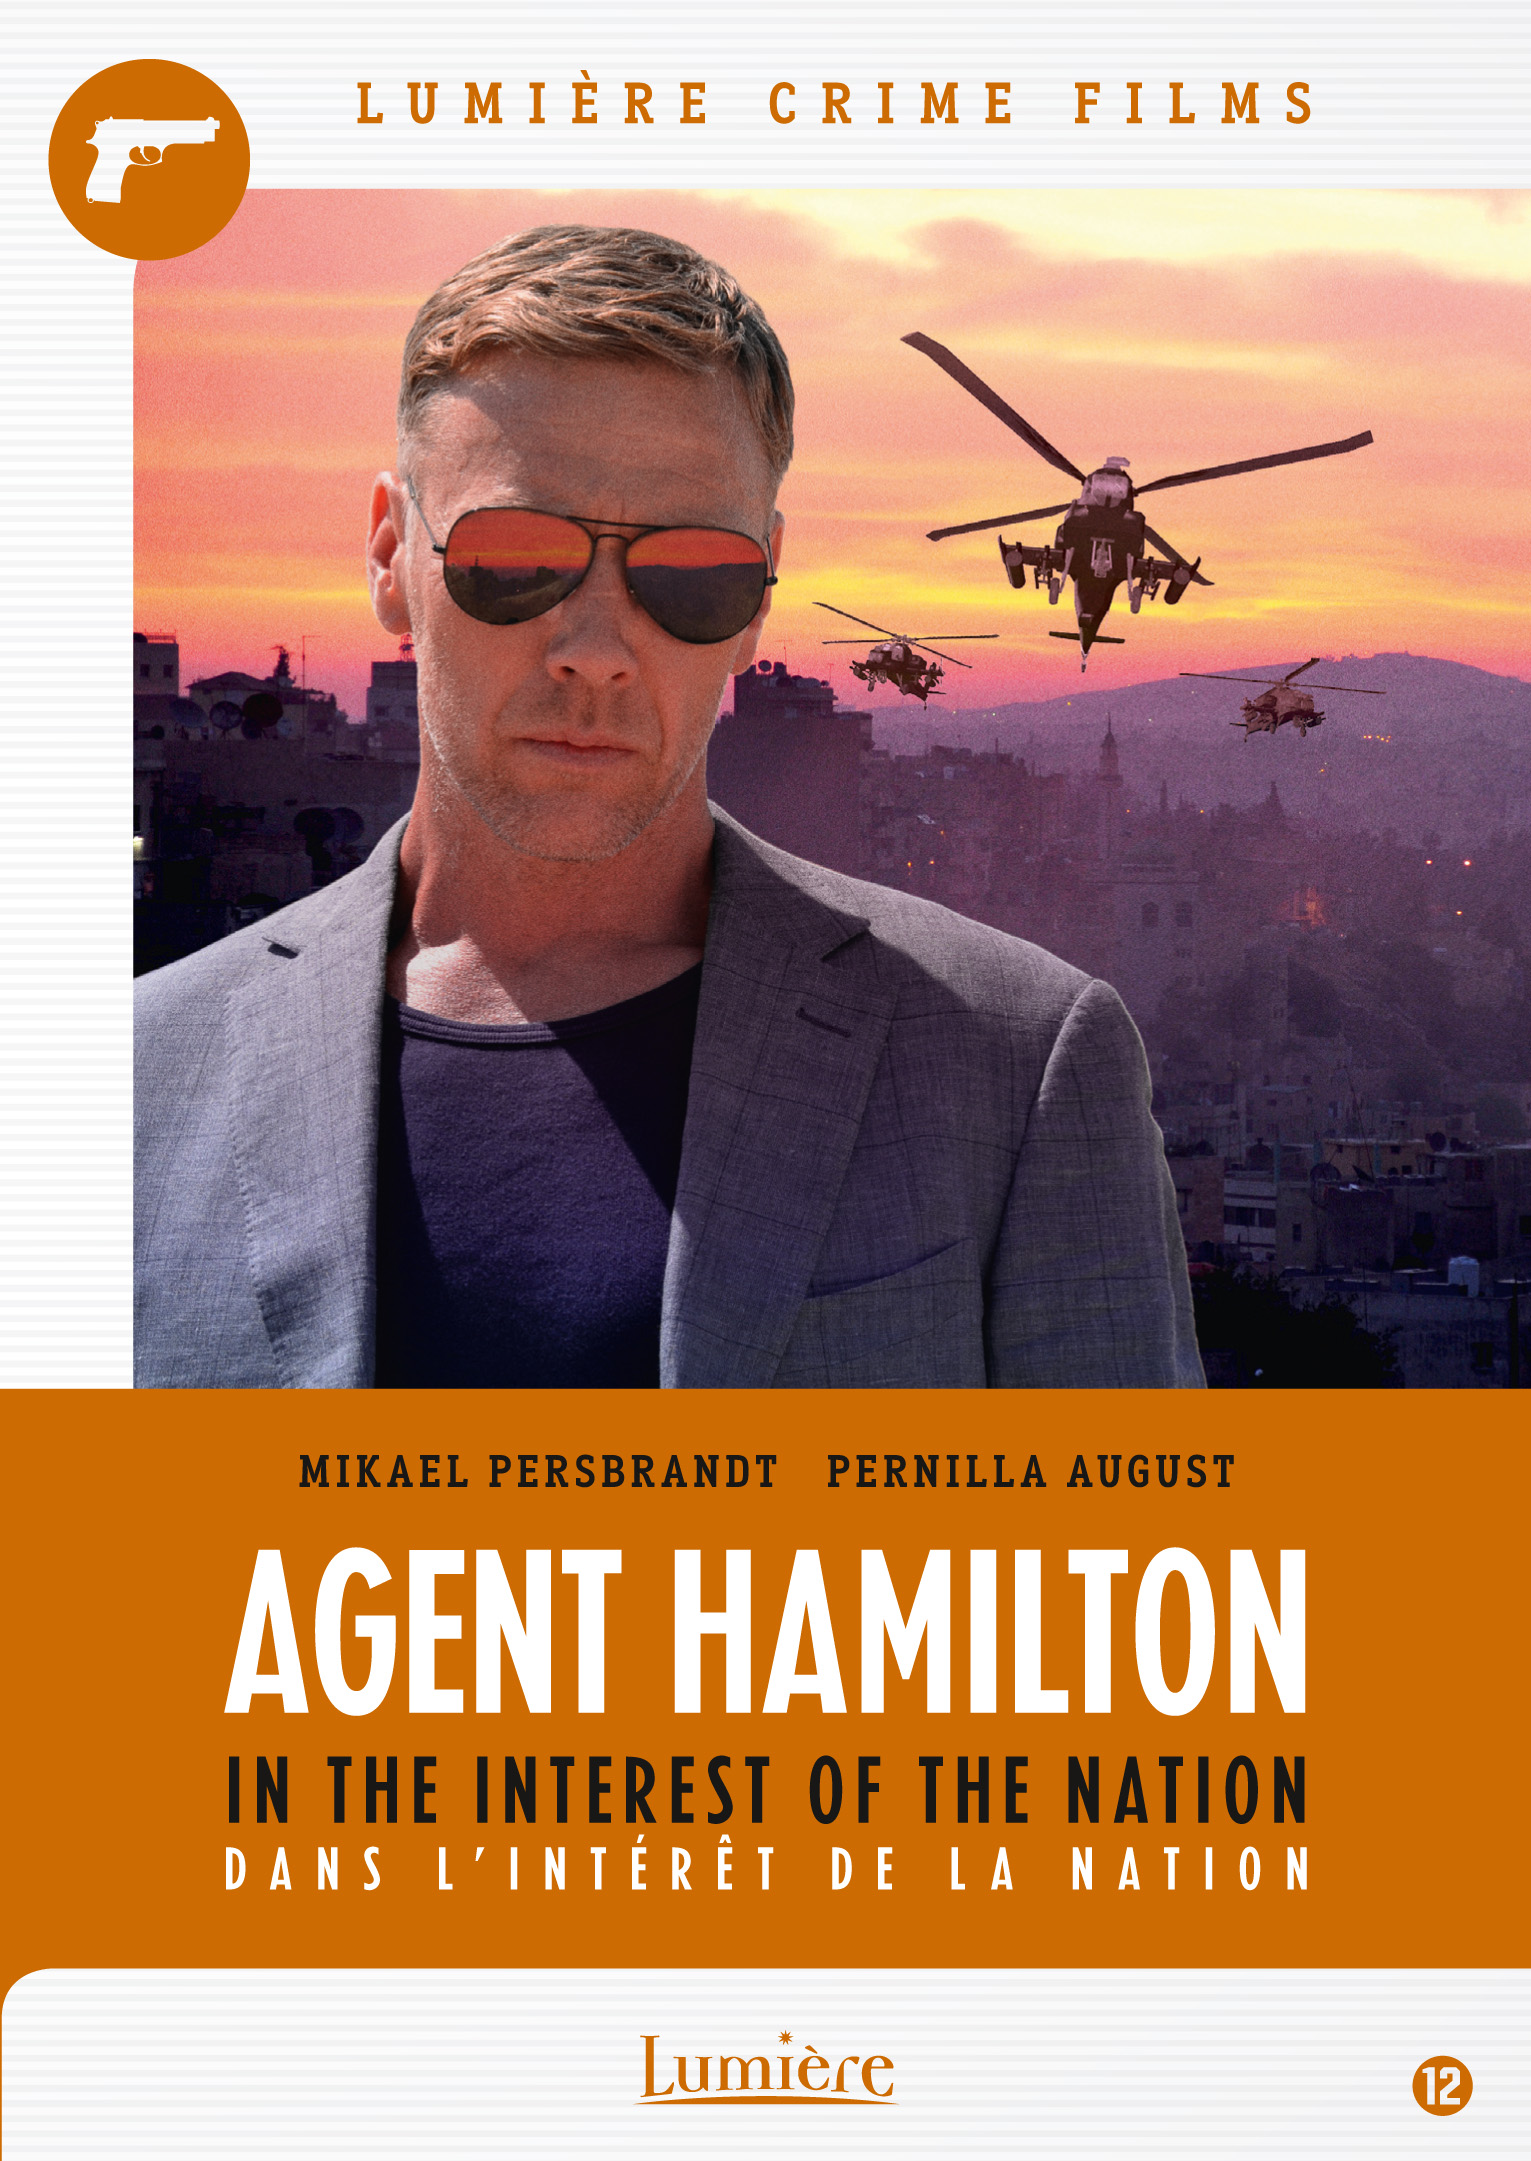 AGENT HAMILTON – In the Interest of the Nation